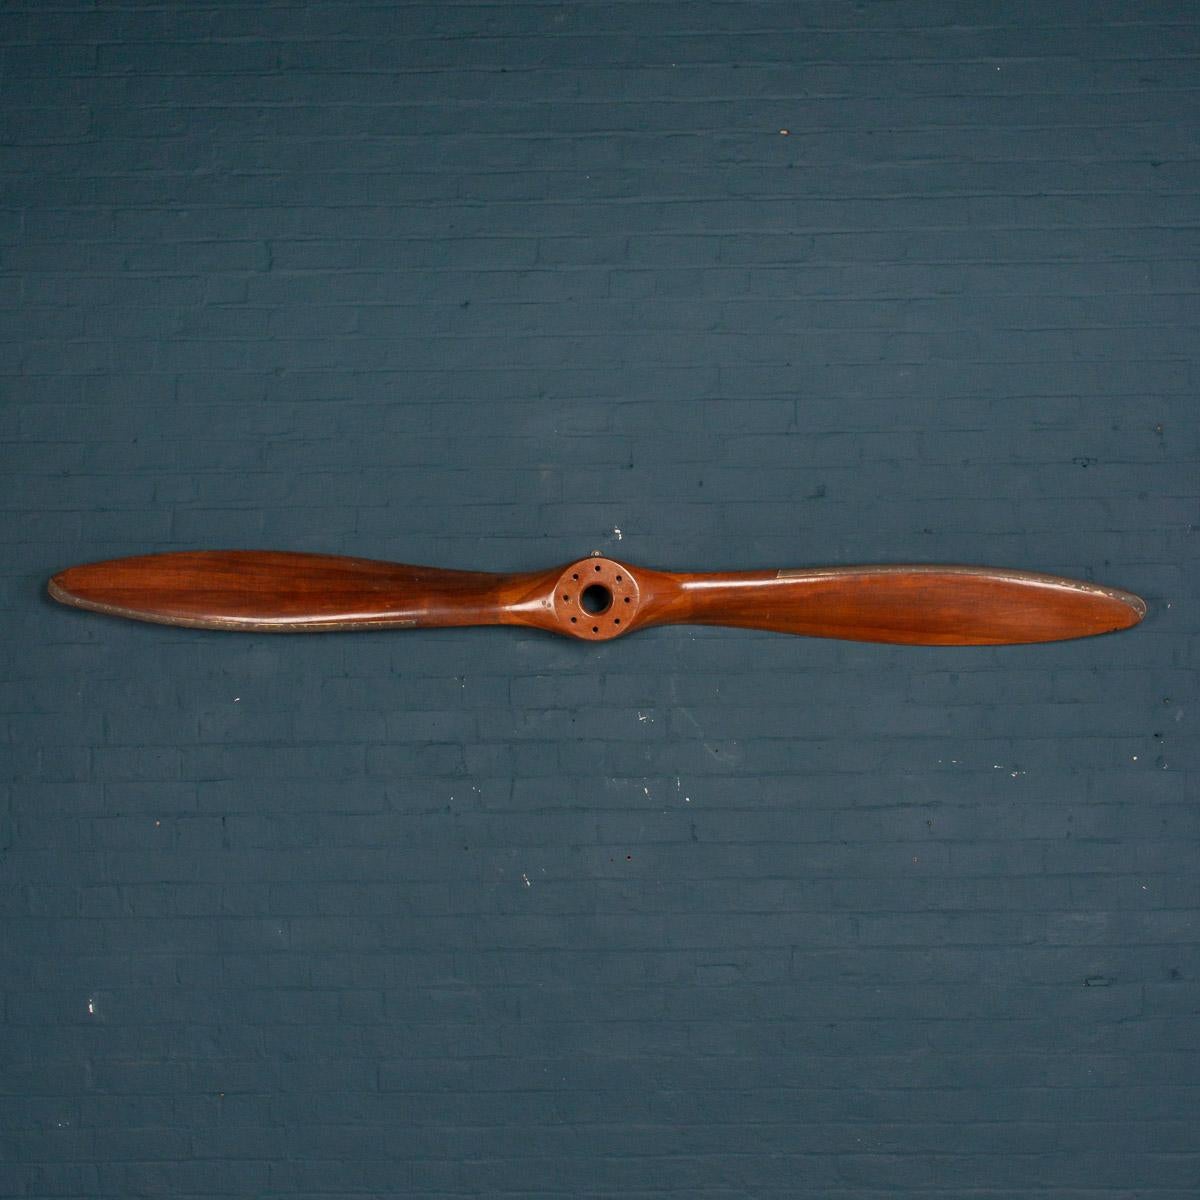 Antique 20th century Avro 504K laminated mahogany propeller bearing stamped date 11/25 (November 1925) and original manufacturer’s proof marks, having folded brass blade guards. The Avro 504 was a First World War biplane aircraft made by the Avro